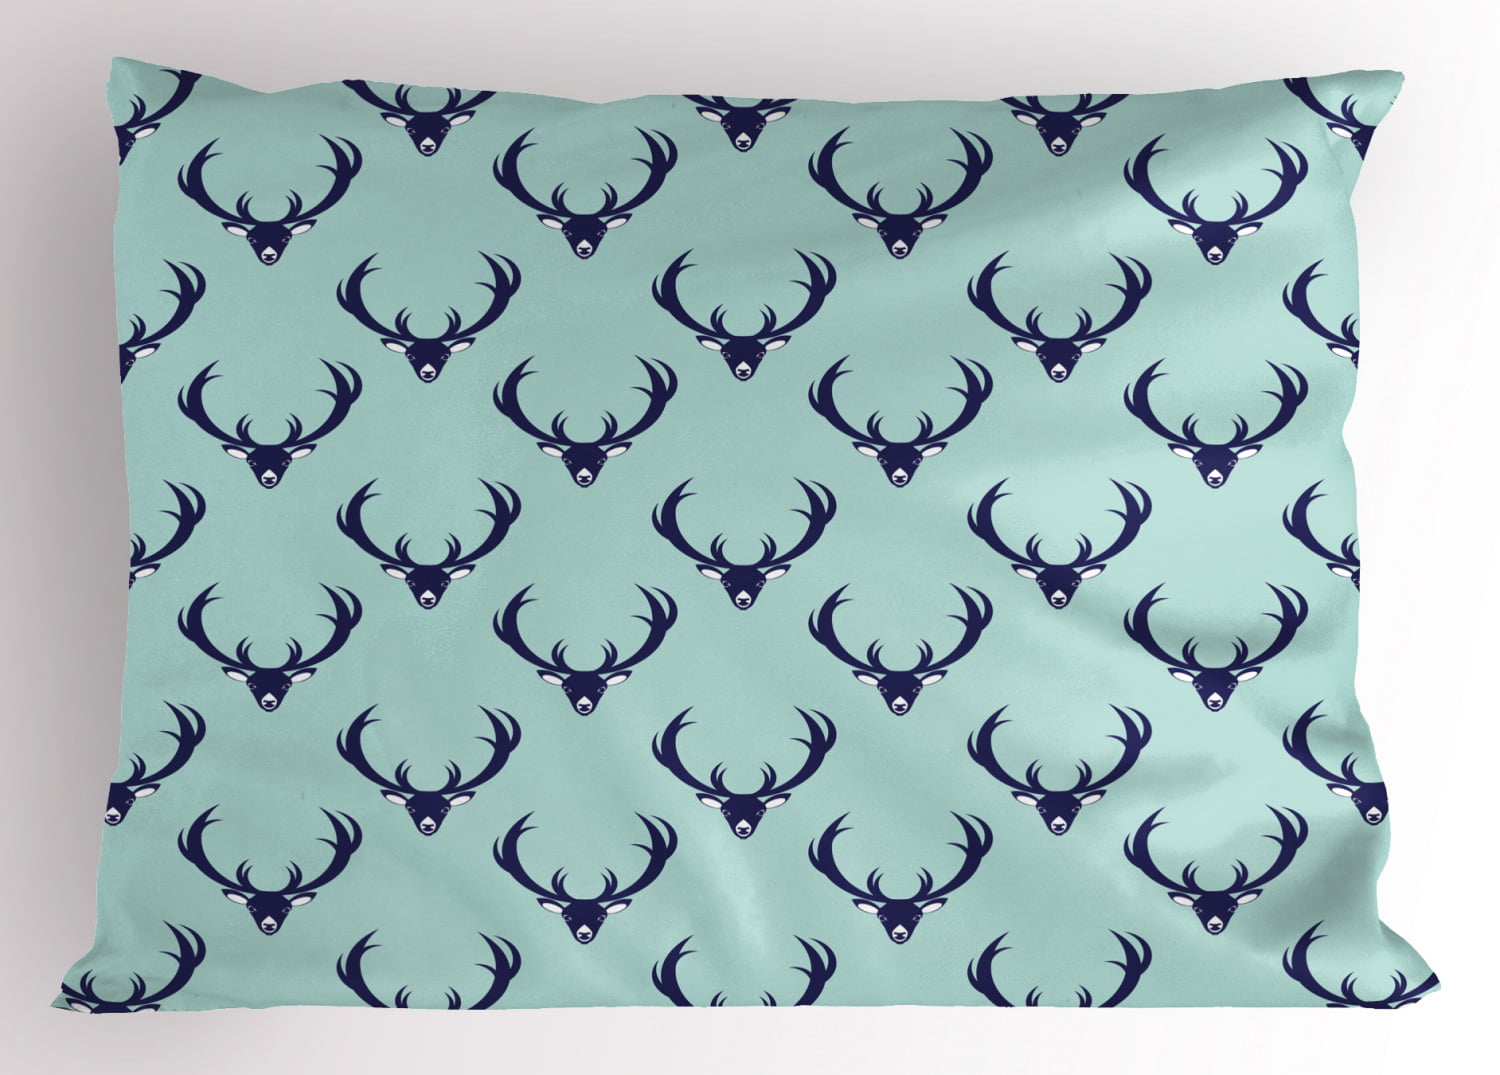 Details about   Moose Pillow Sham Red Forest Antlers Deer Printed Pillowcase 30 x 20 Inches 